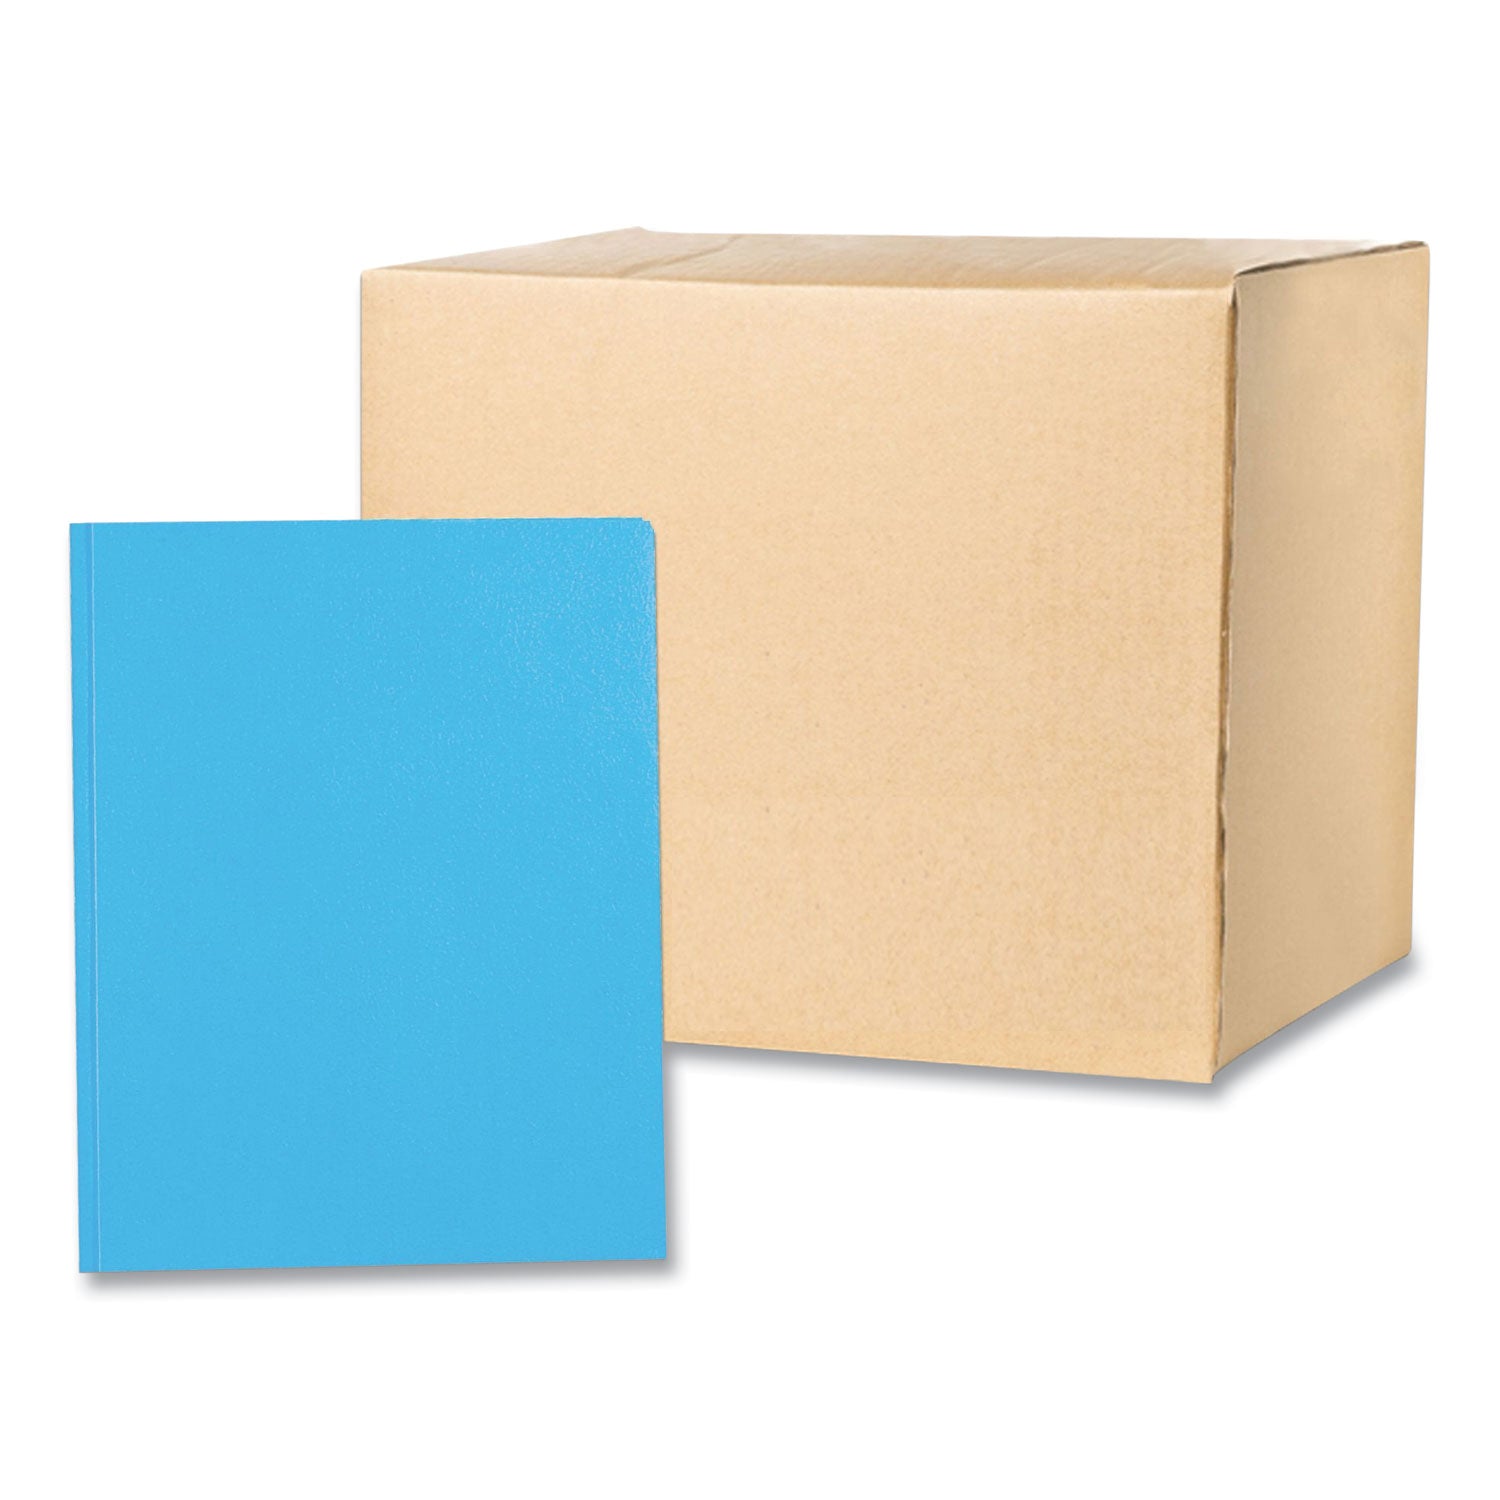 pocket-folder-with-3-fasteners-05-capacity-11-x-85-light-blue-25-box-10-boxes-carton-ships-in-4-6-business-days_roa54127cs - 1